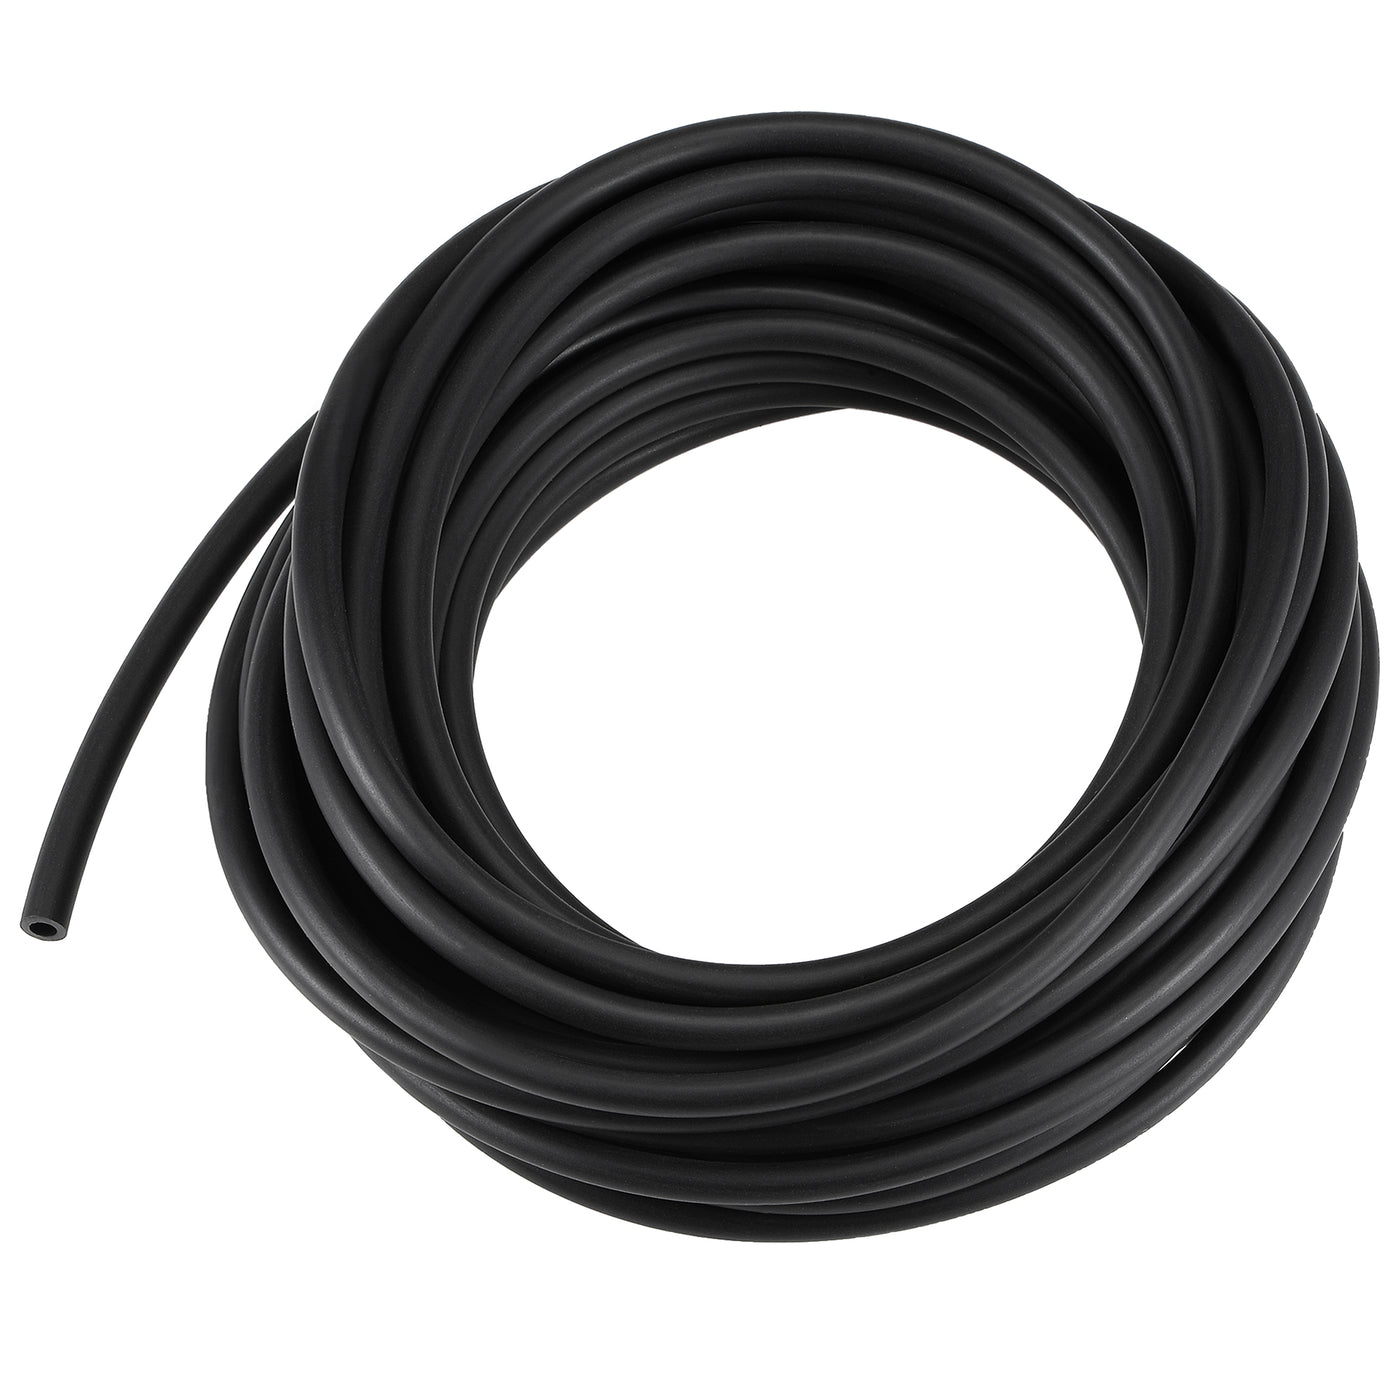 Uxcell Uxcell Fuel Line Hose 3mm ID 5mm OD 26ft Oil Line & Fuel Pipe Rubber Water Hose Black